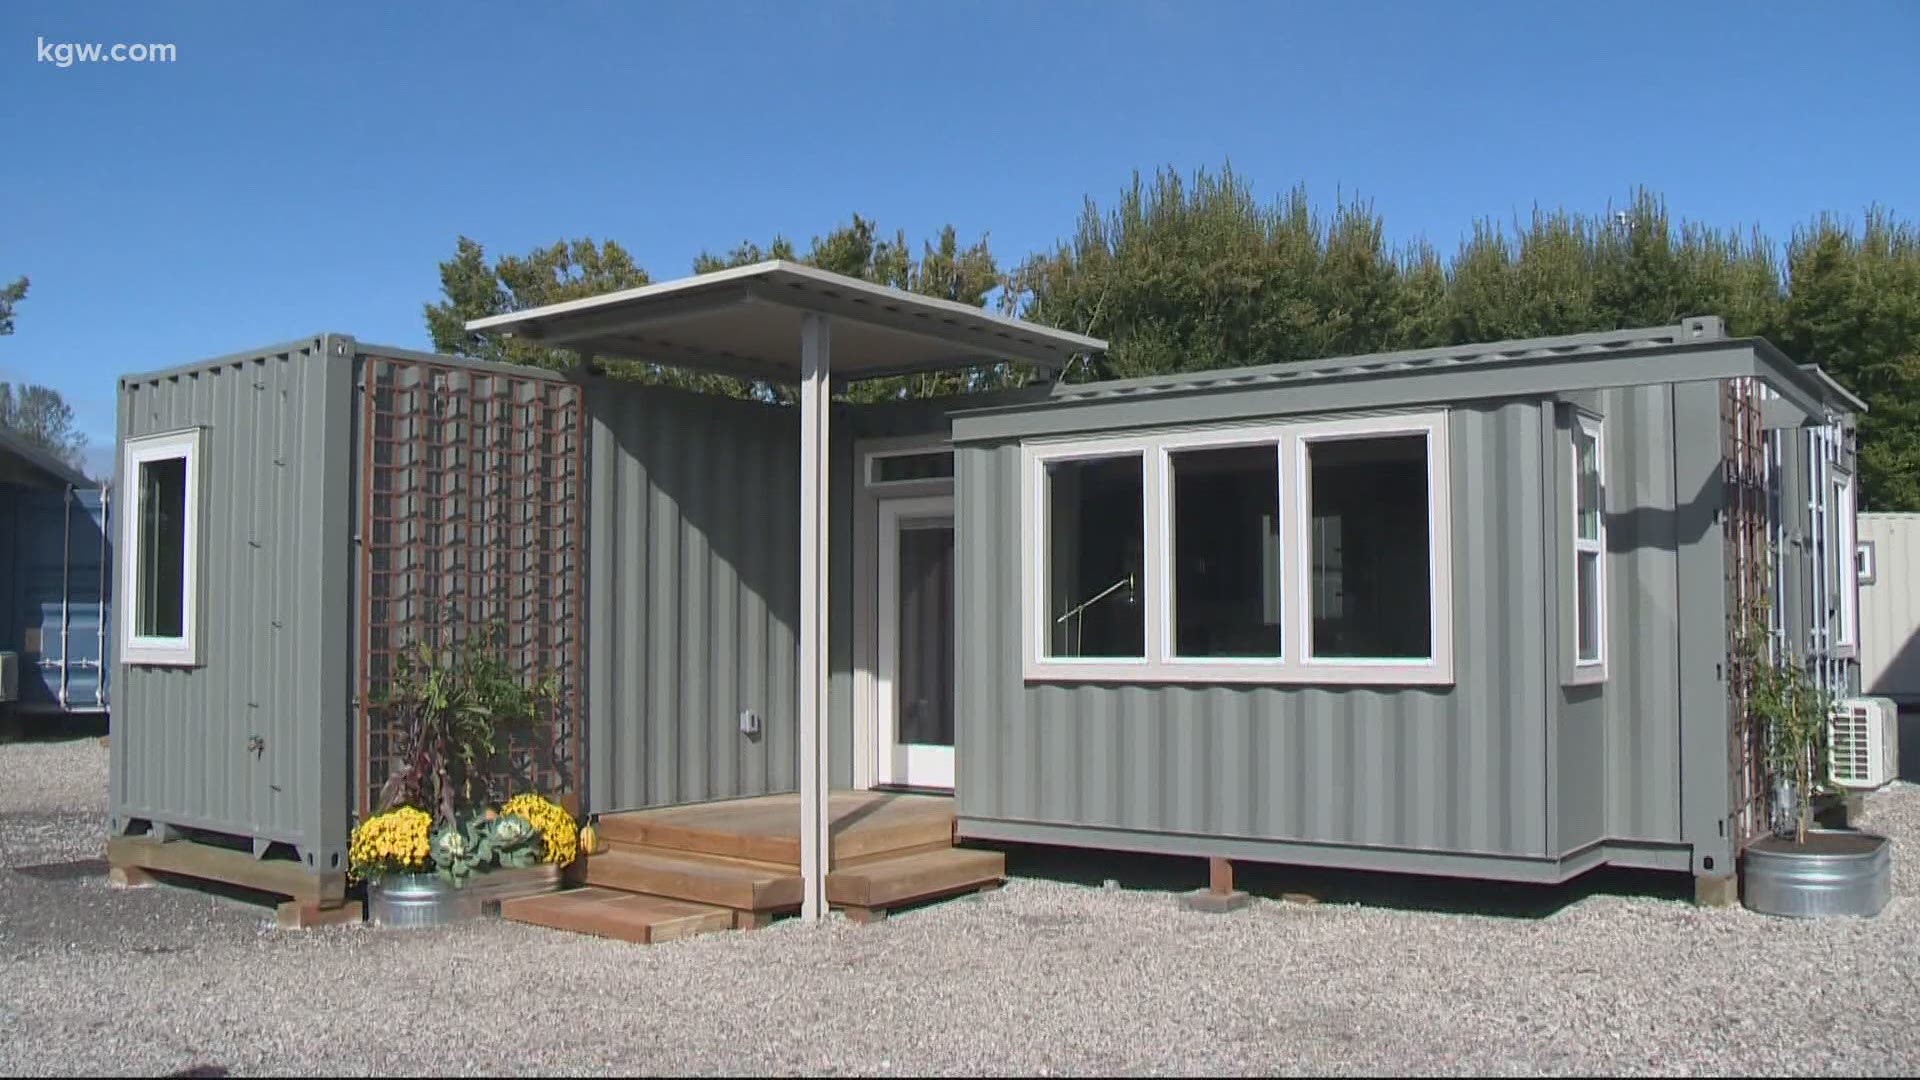 A Portland-area company is making homes out of shipping containers and you can check them out during a free tour. Jon Goodwin gives us a preview.